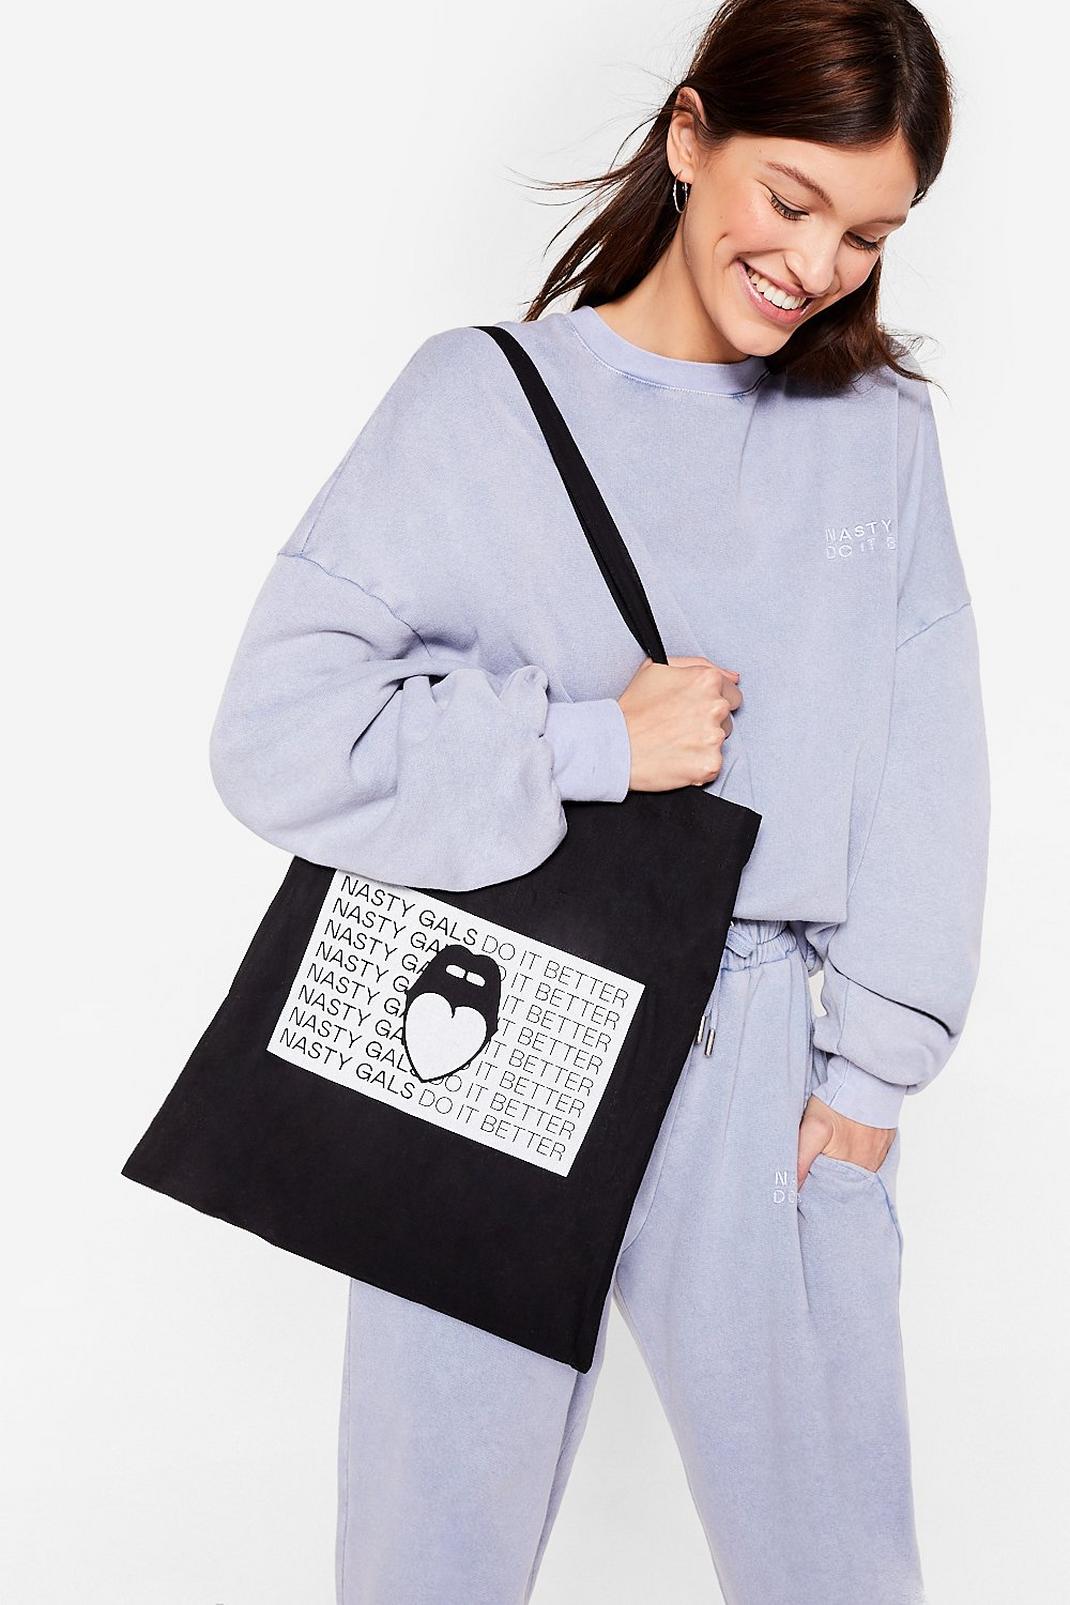 Nasty Gals Do It Better Graphic Tote Bag image number 1